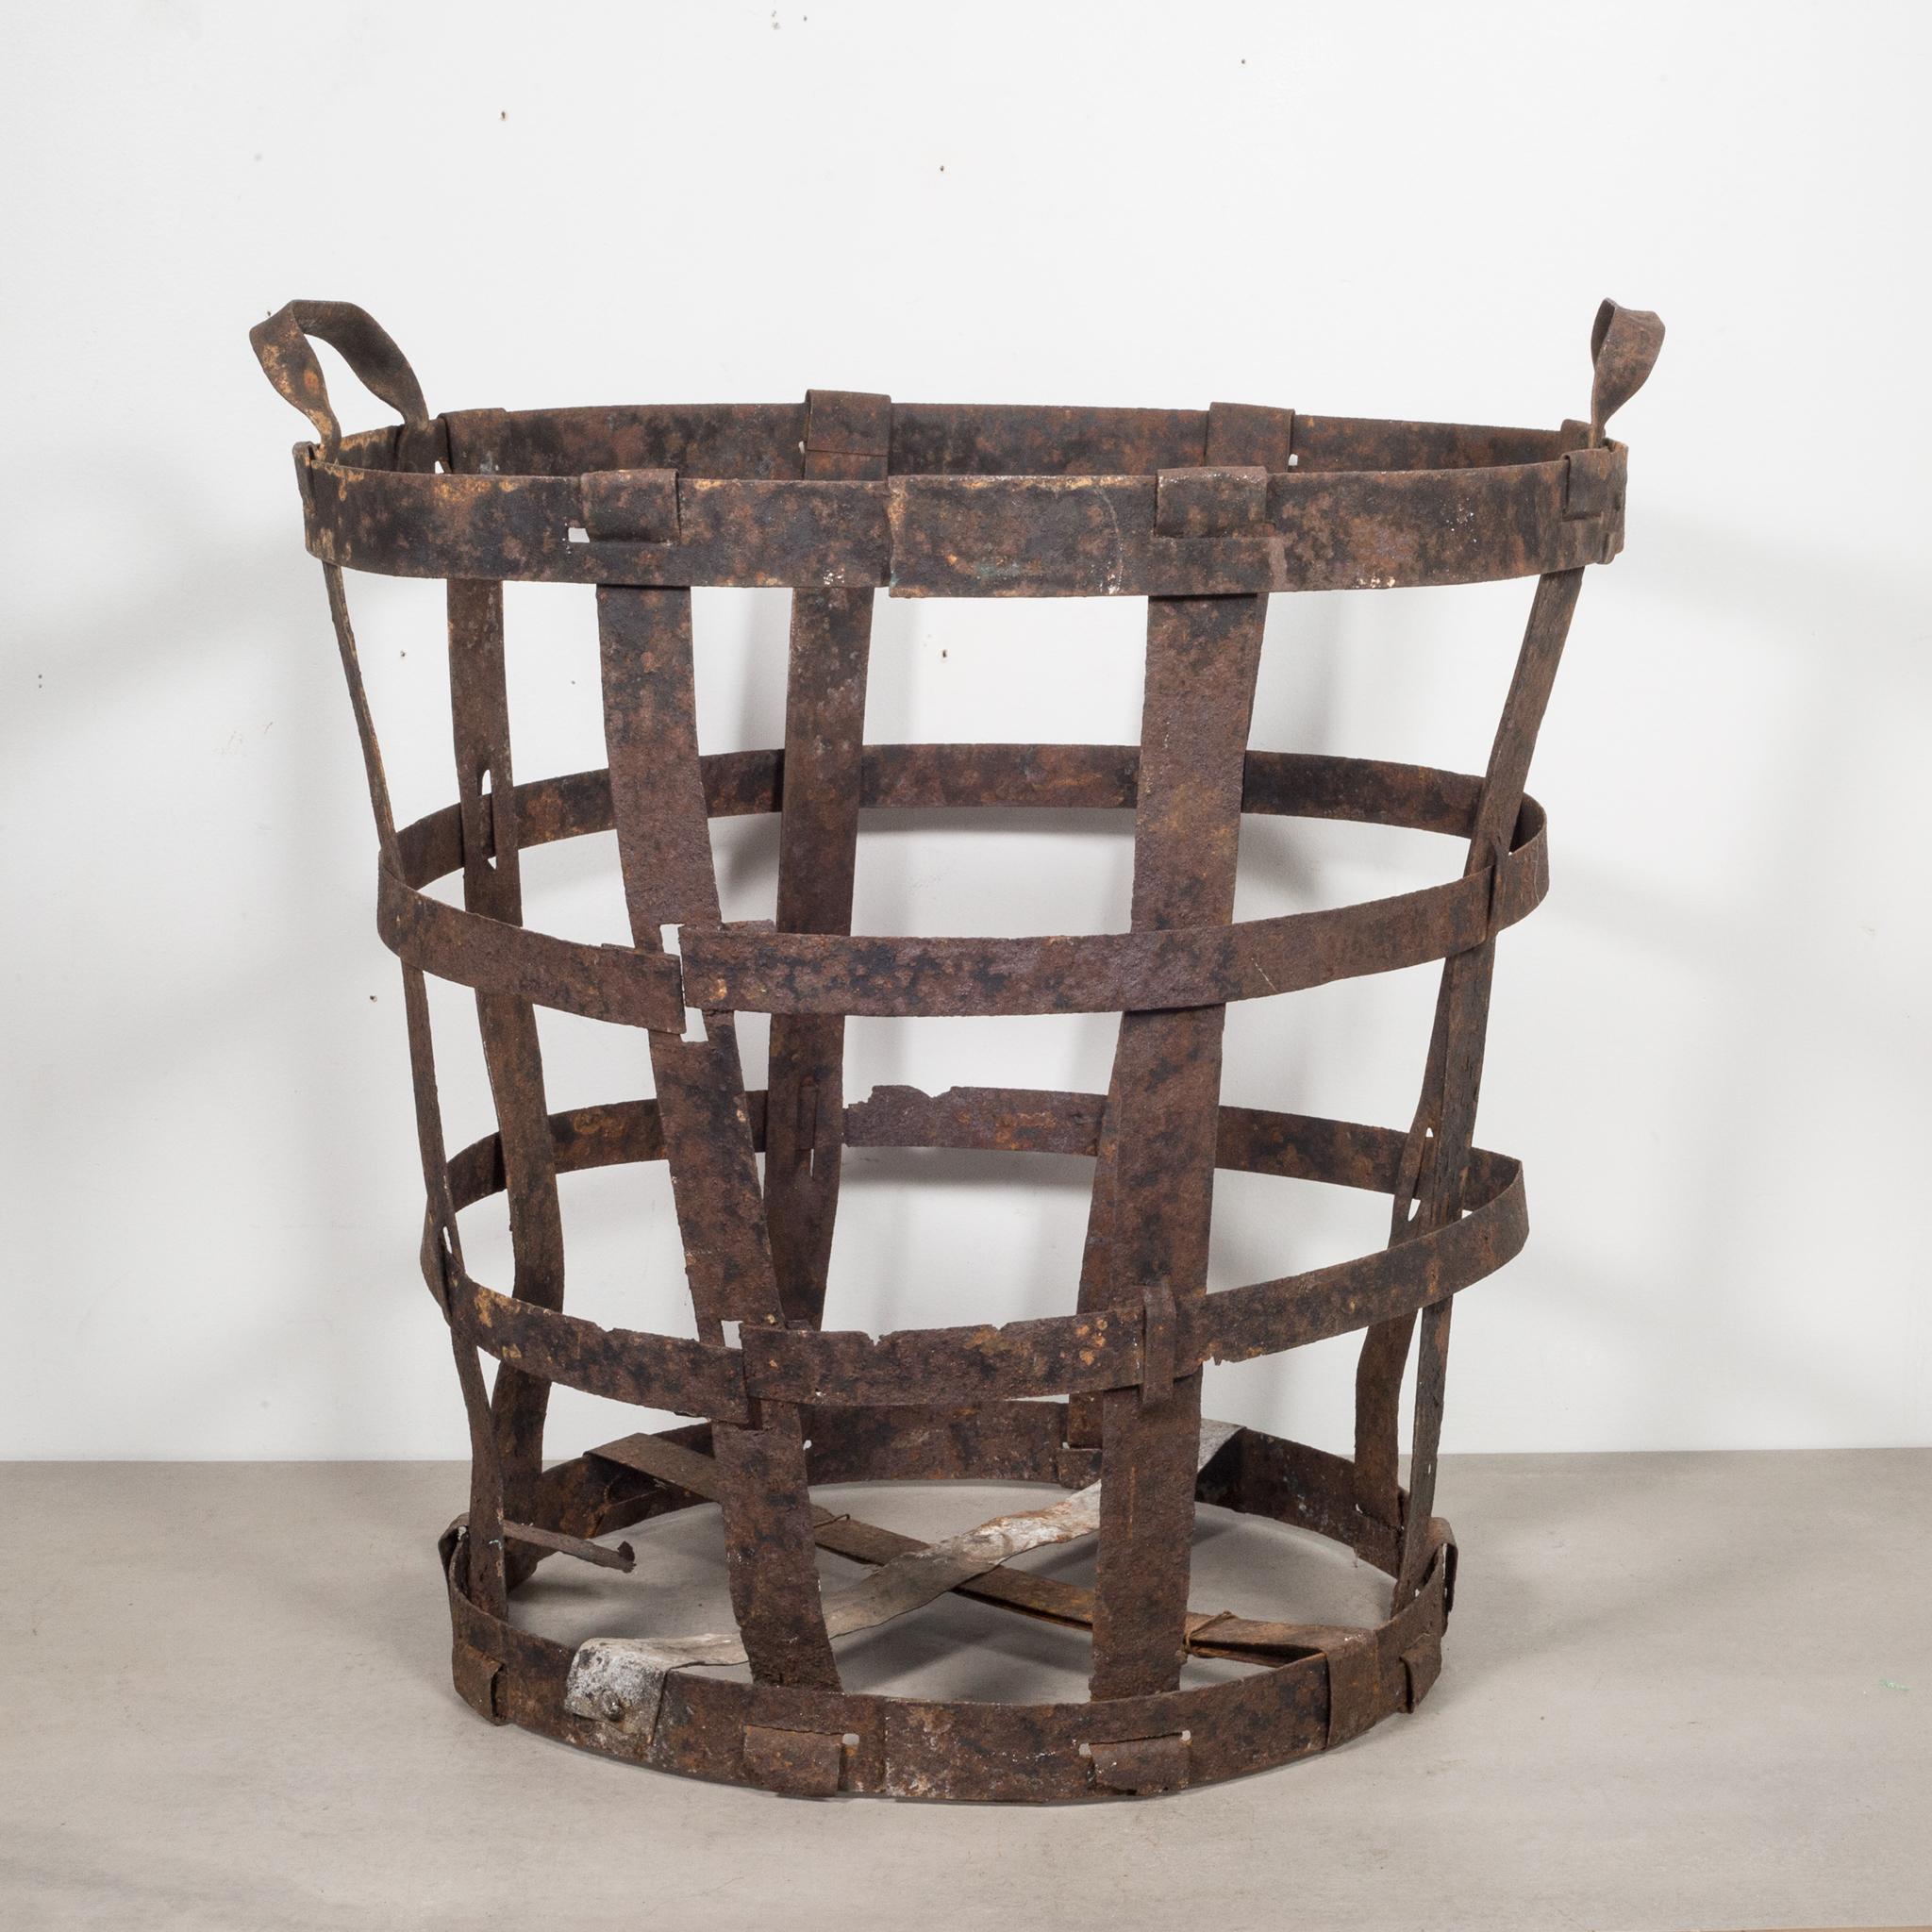 Antique Factory Steel Band Basket, c.1880-1920 In Good Condition For Sale In San Francisco, CA